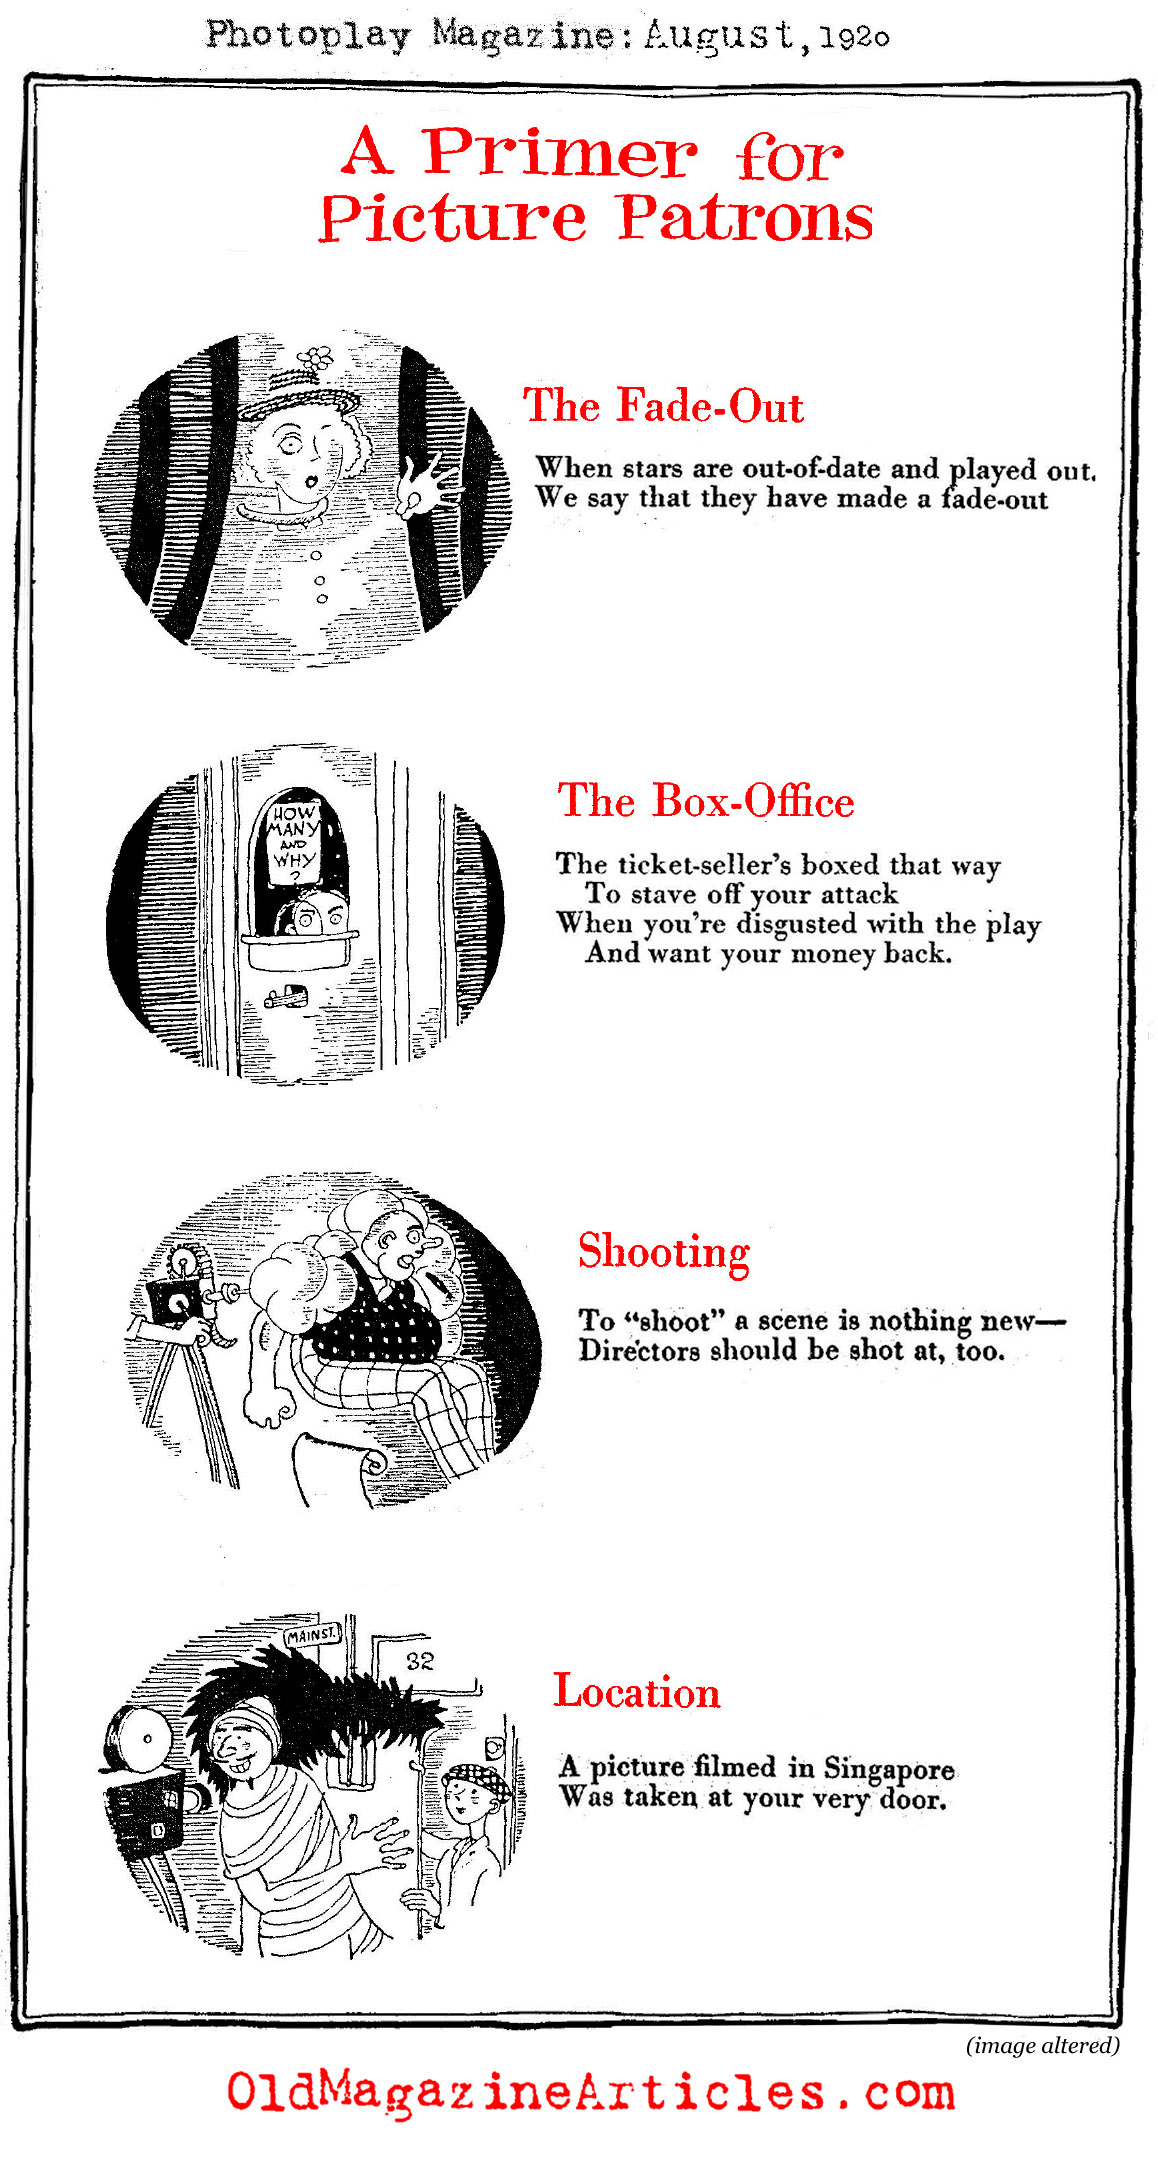 A Glossary of Terms for Movie Fans (Vanity Fair, 1920)